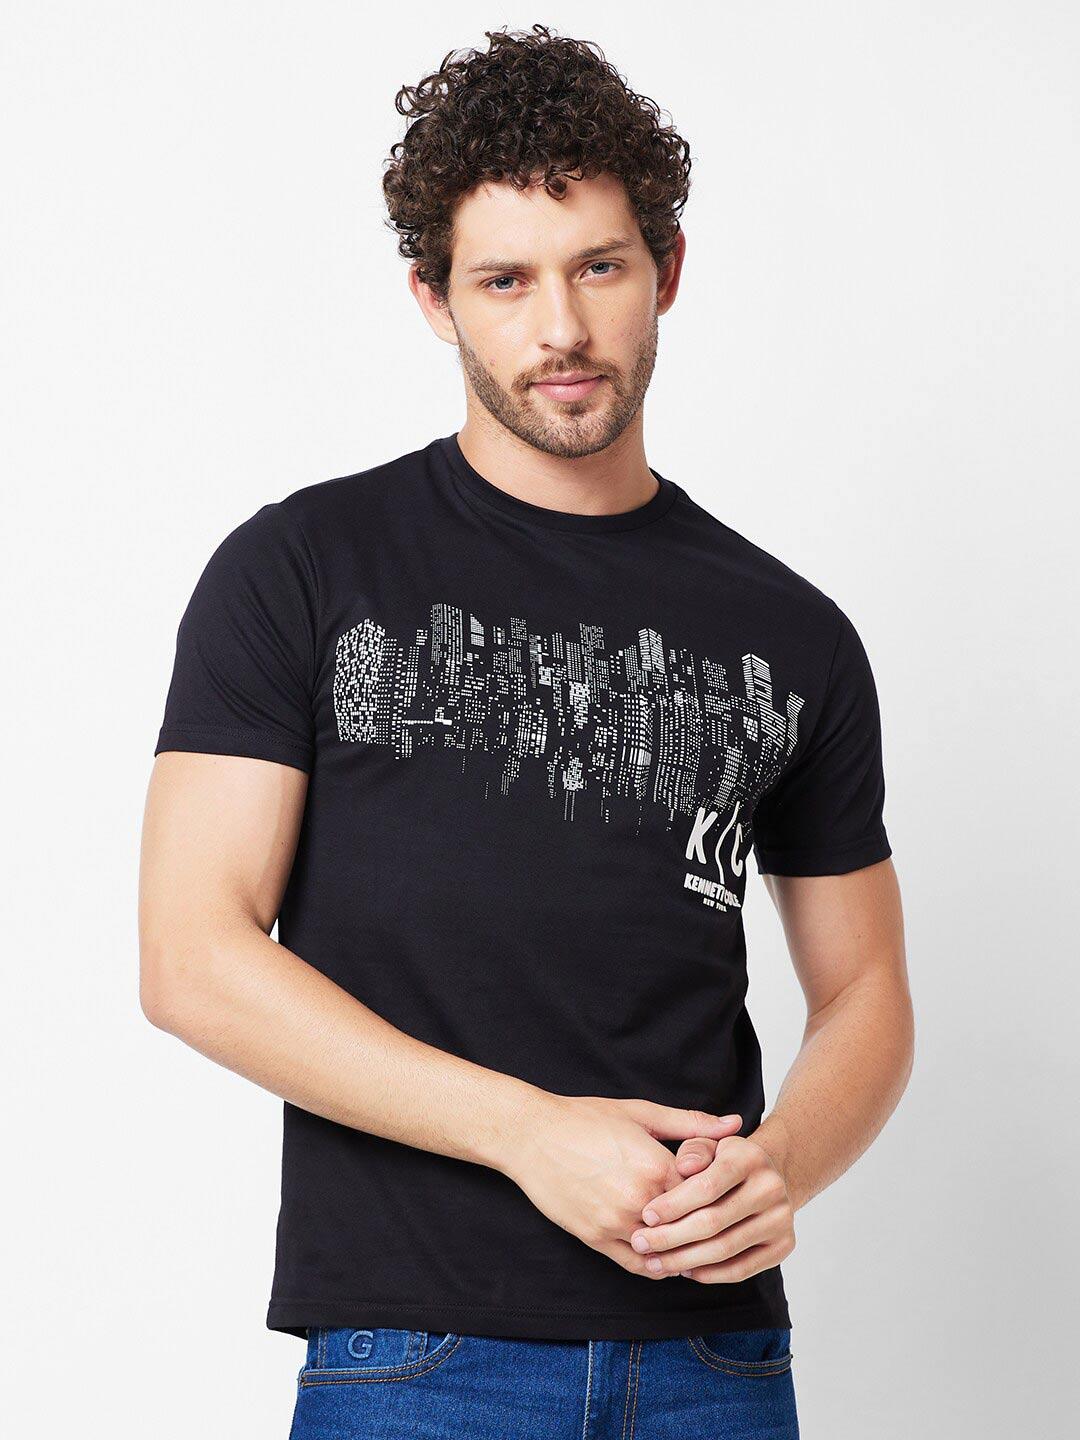 kenneth-cole-graphic-printed-pure-cotton-slim-fit-t-shirt